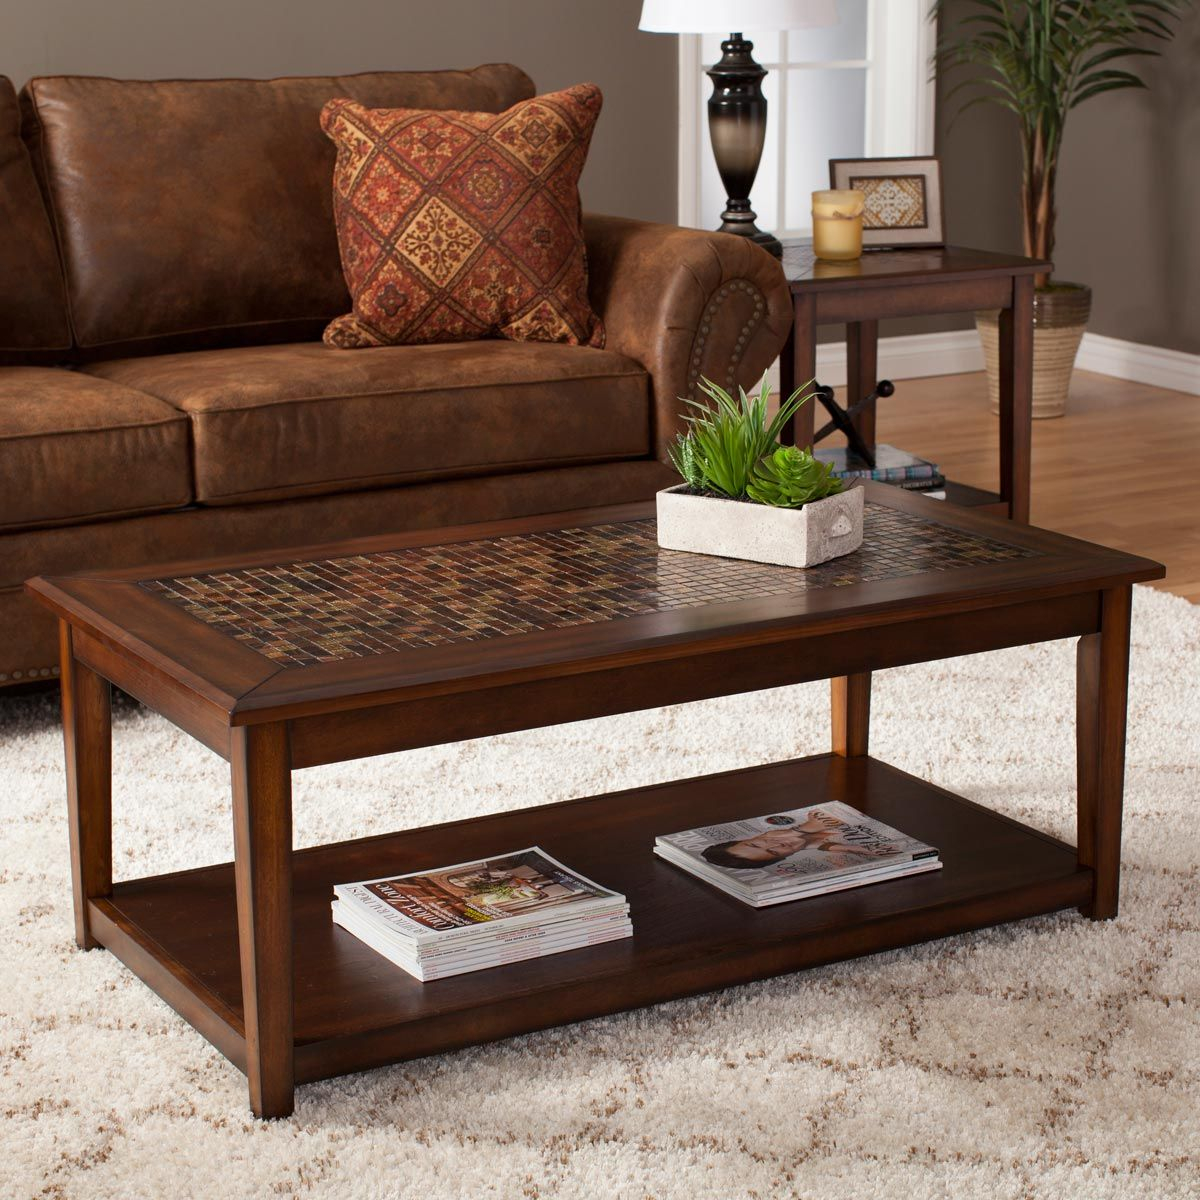 Mia Accent Tables Jeromes Furniture Living Room Rustic Sofa with dimensions 1200 X 1200